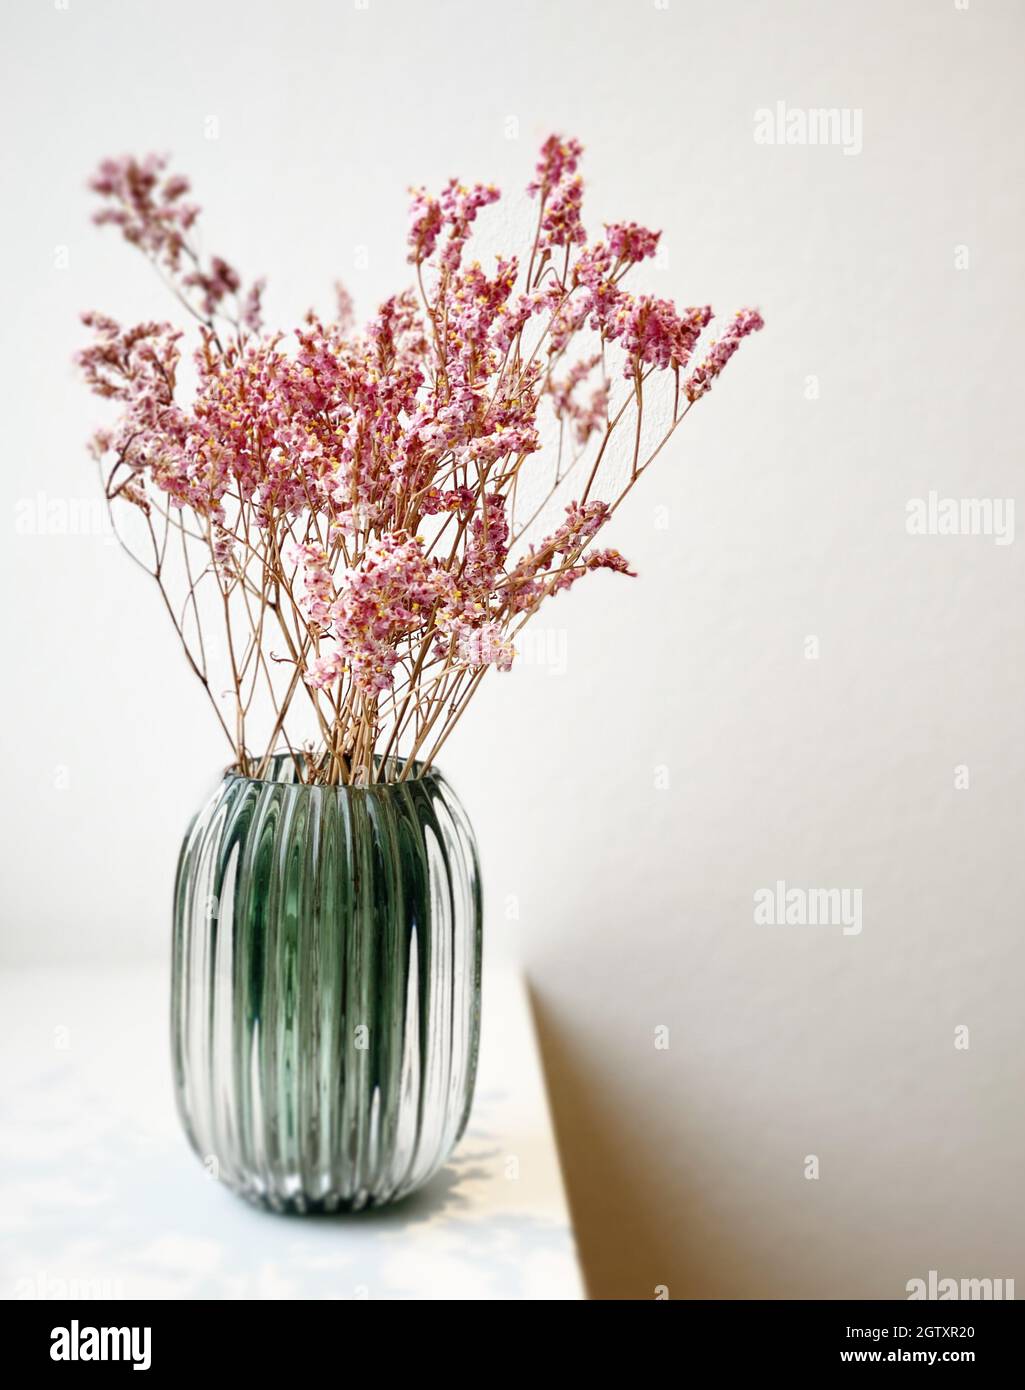 Pink Flowers In Vase On Table Stock Photo